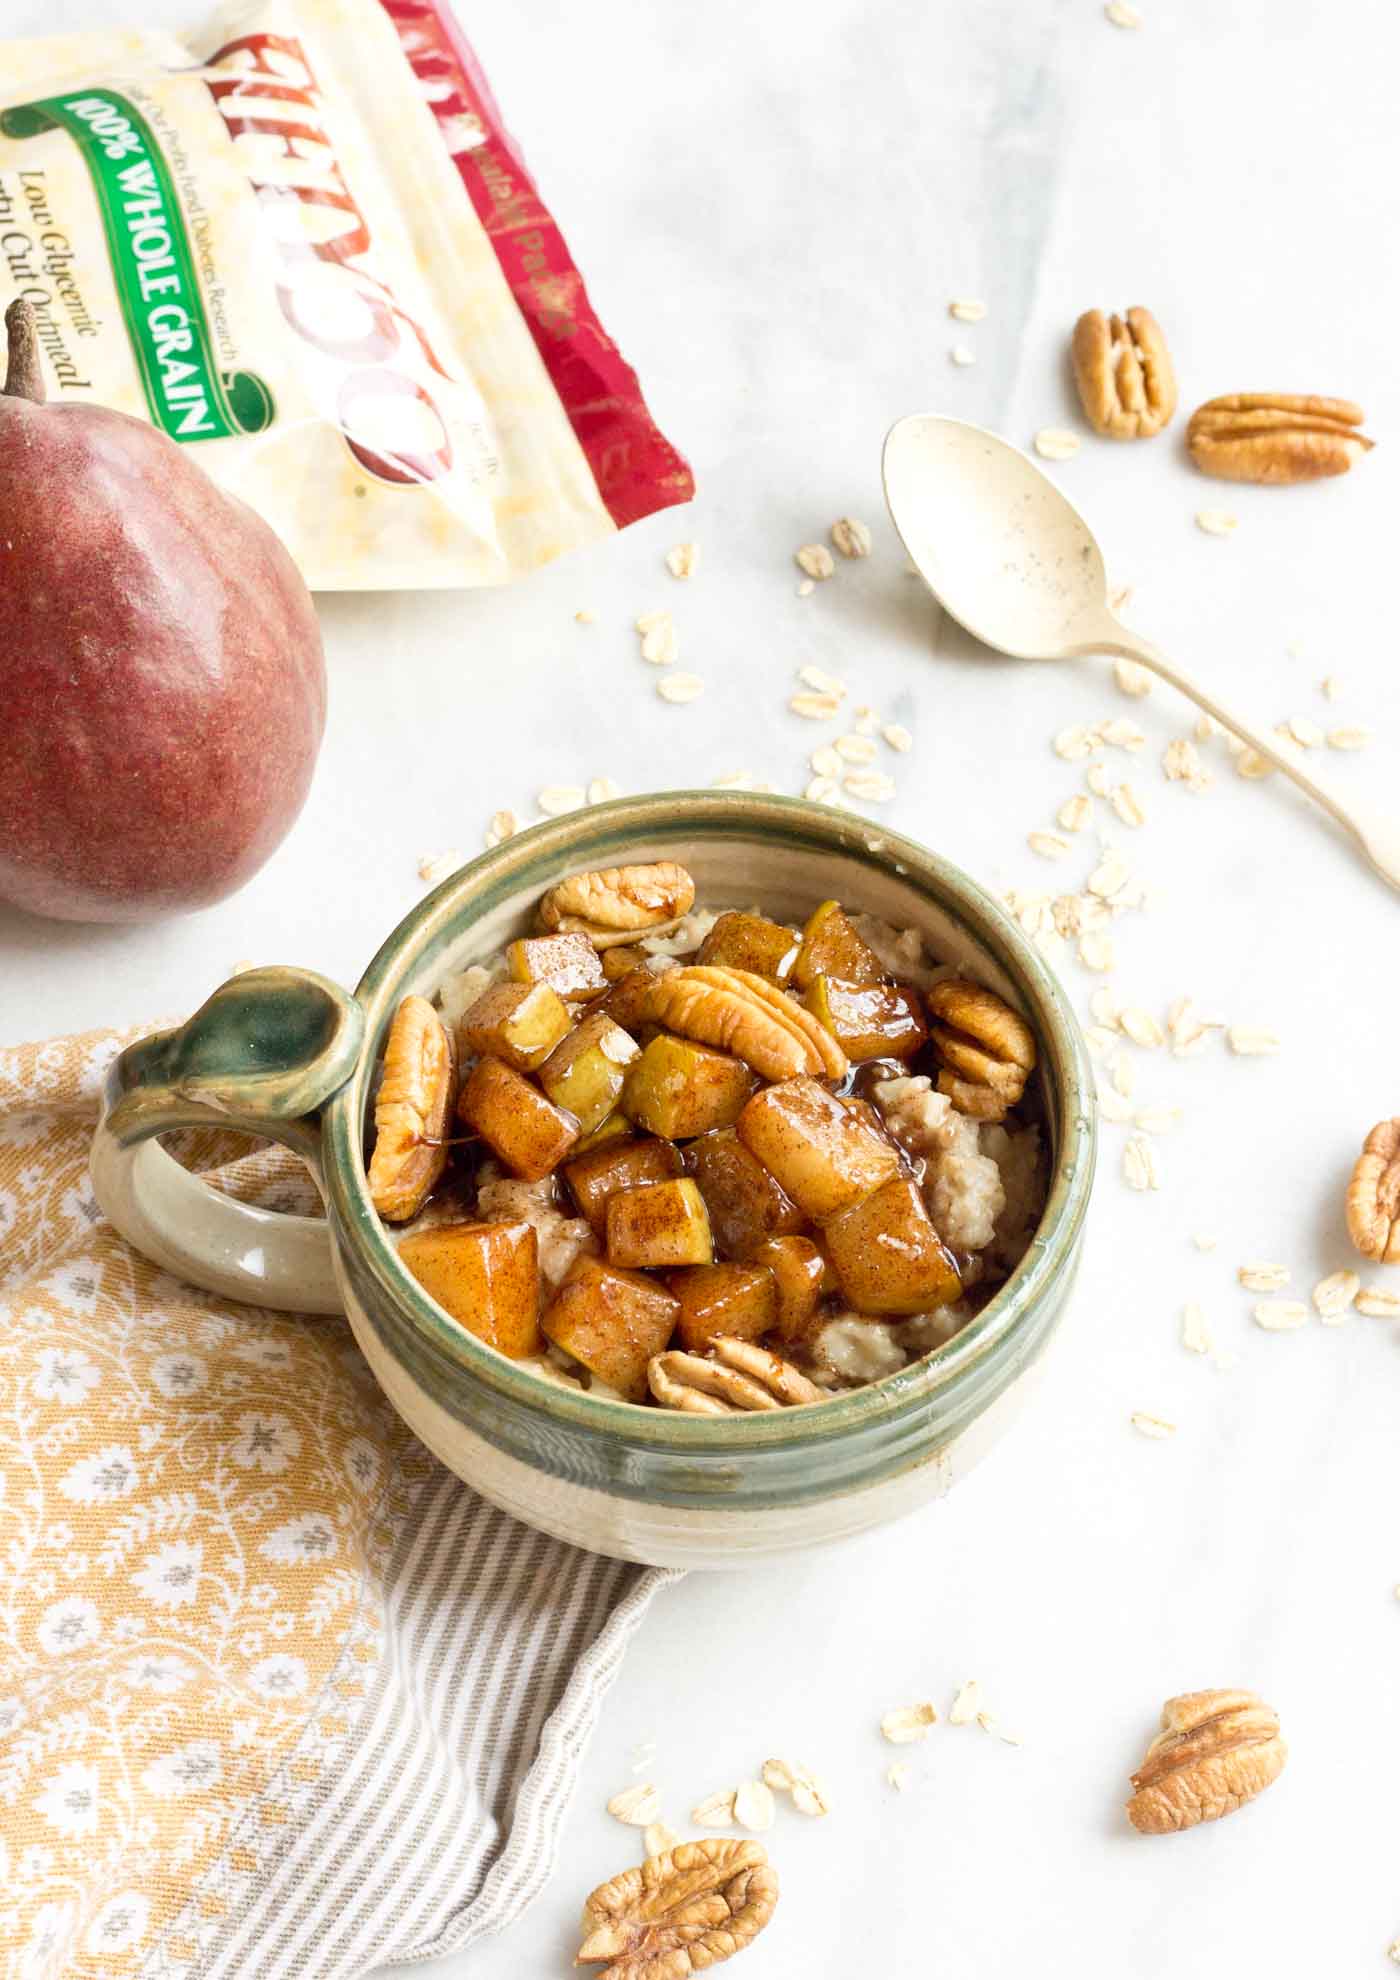 I can't get enough of this Caramelized Pear Oatmeal. It's all cinnamon-y and warm and comforting, especially on a chilly fall morning! YAY!!